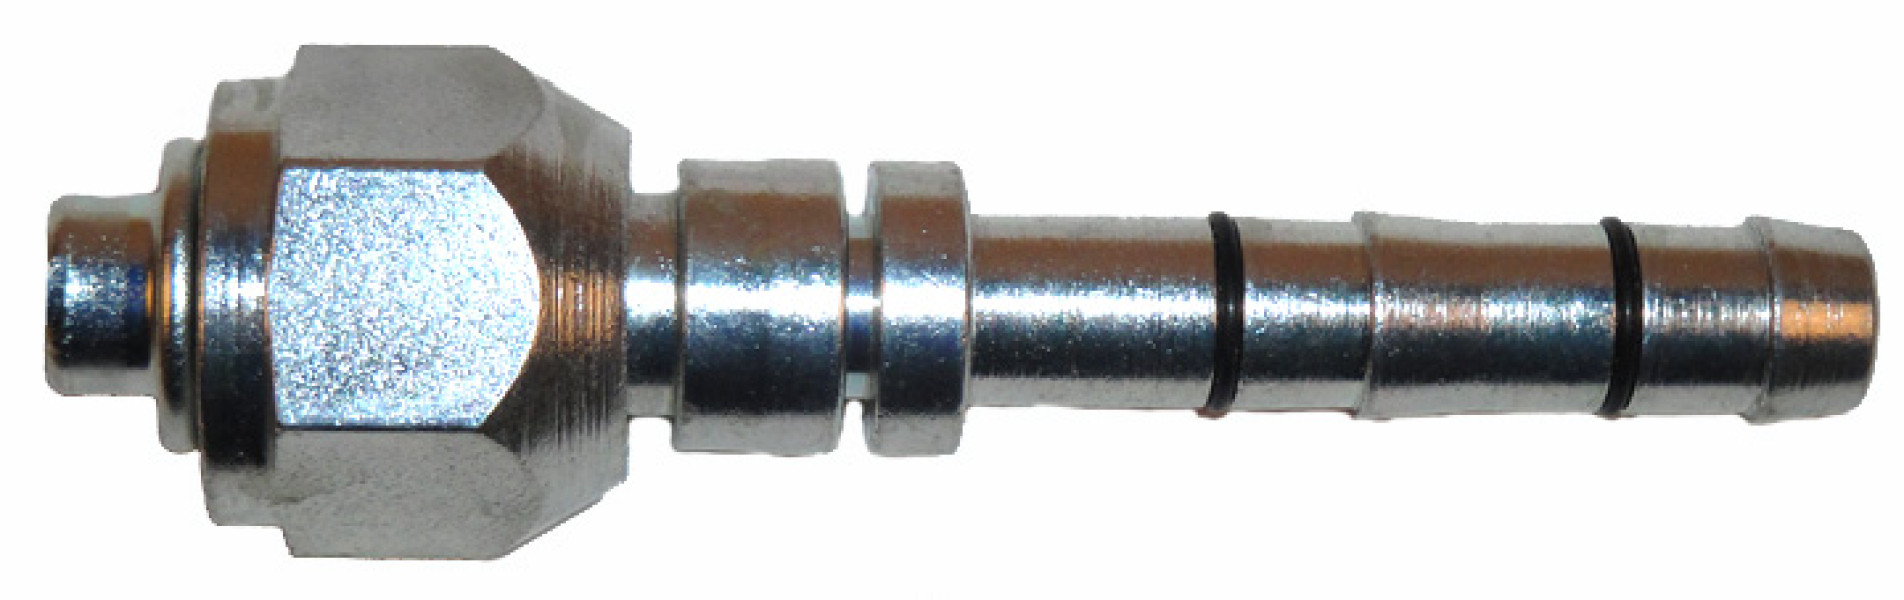 Image of A/C Refrigerant Hose Fitting from Sunair. Part number: FJ5984-0606S